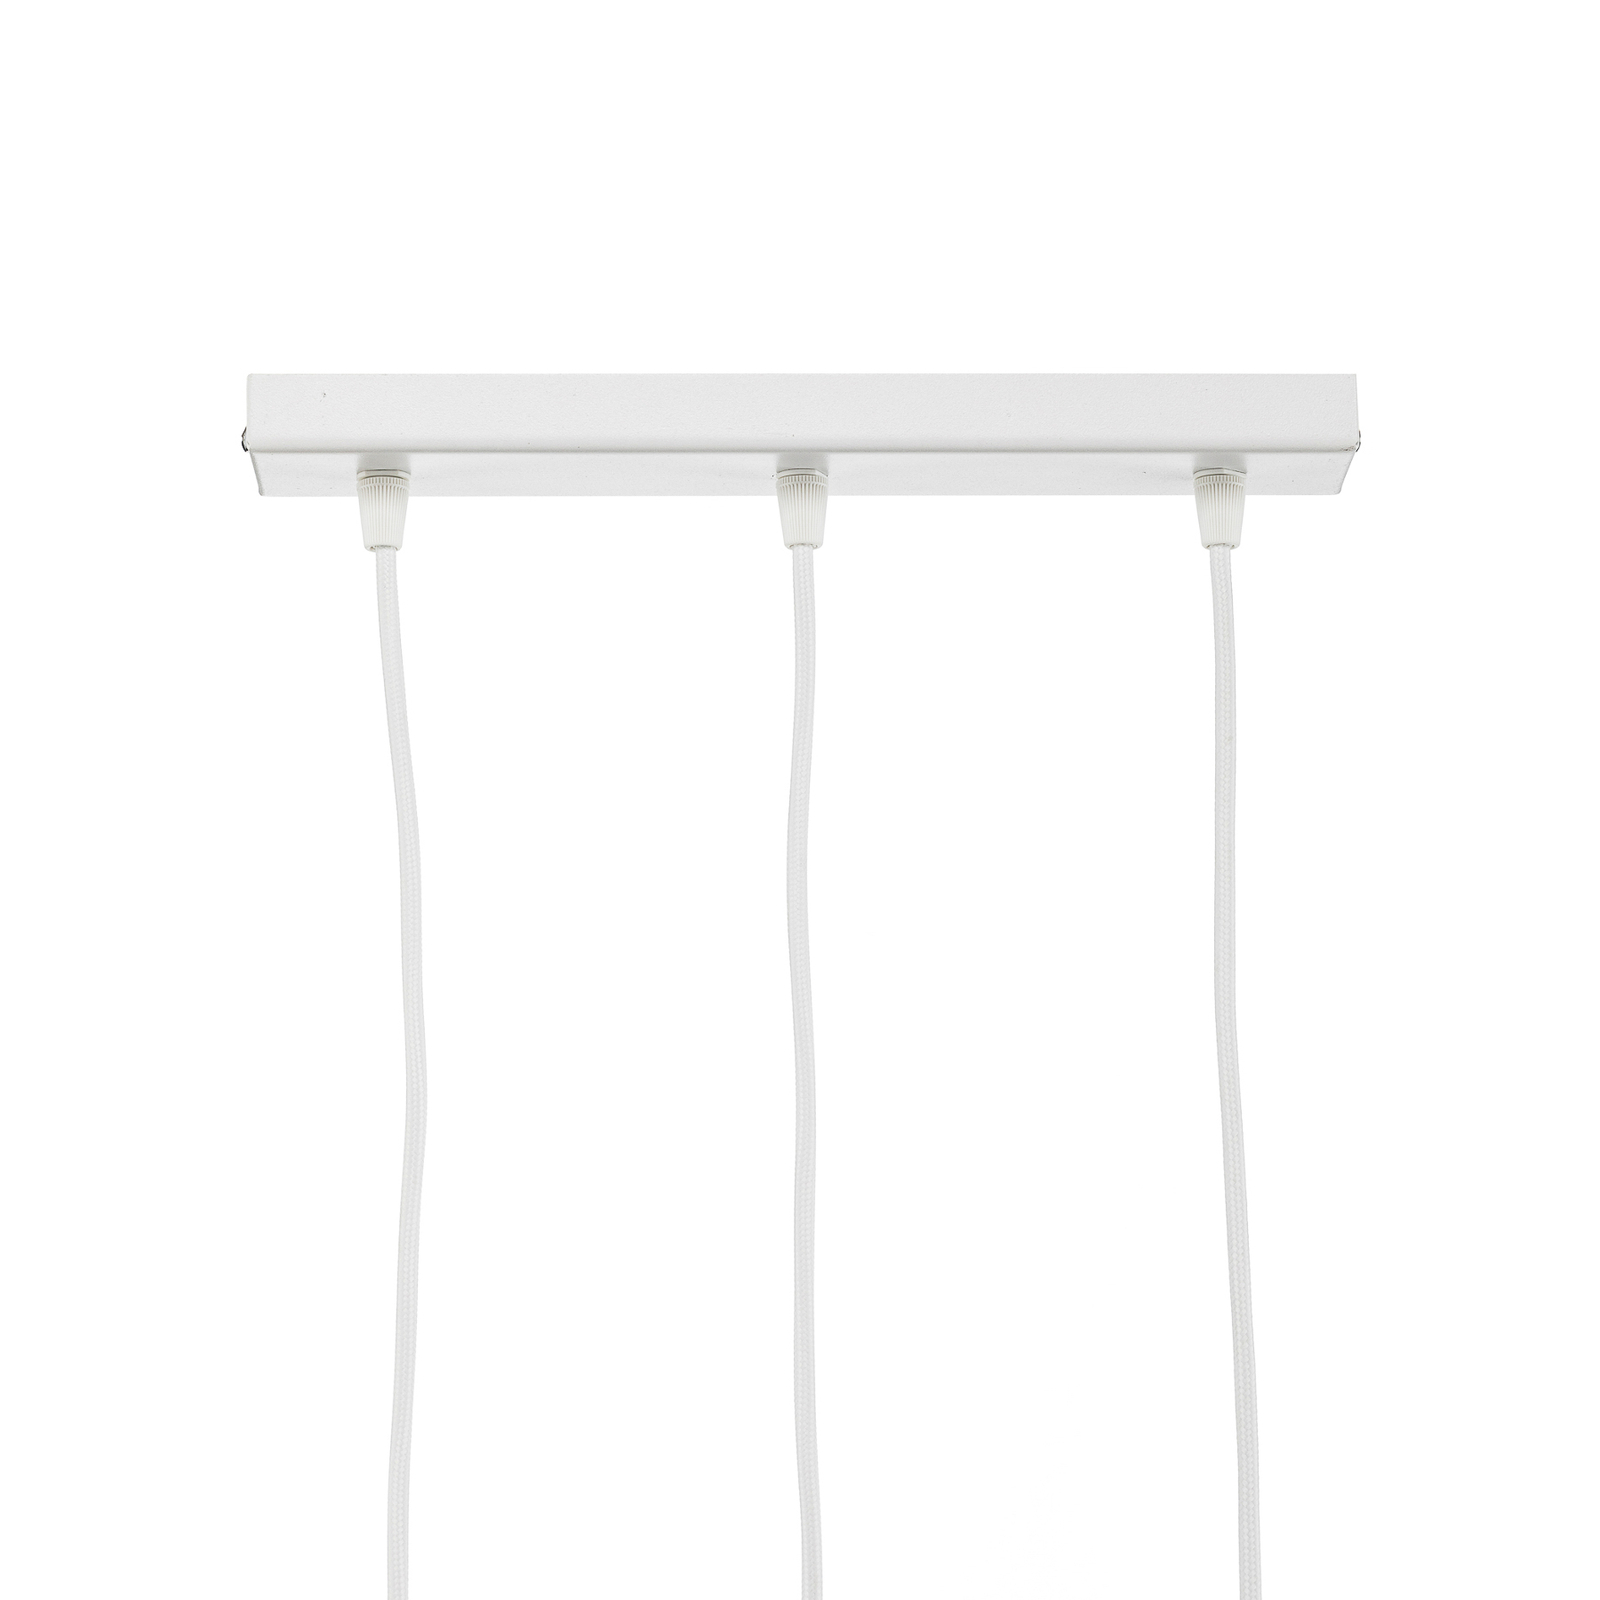 Thin hanglamp, wit, 3-lamps, linear